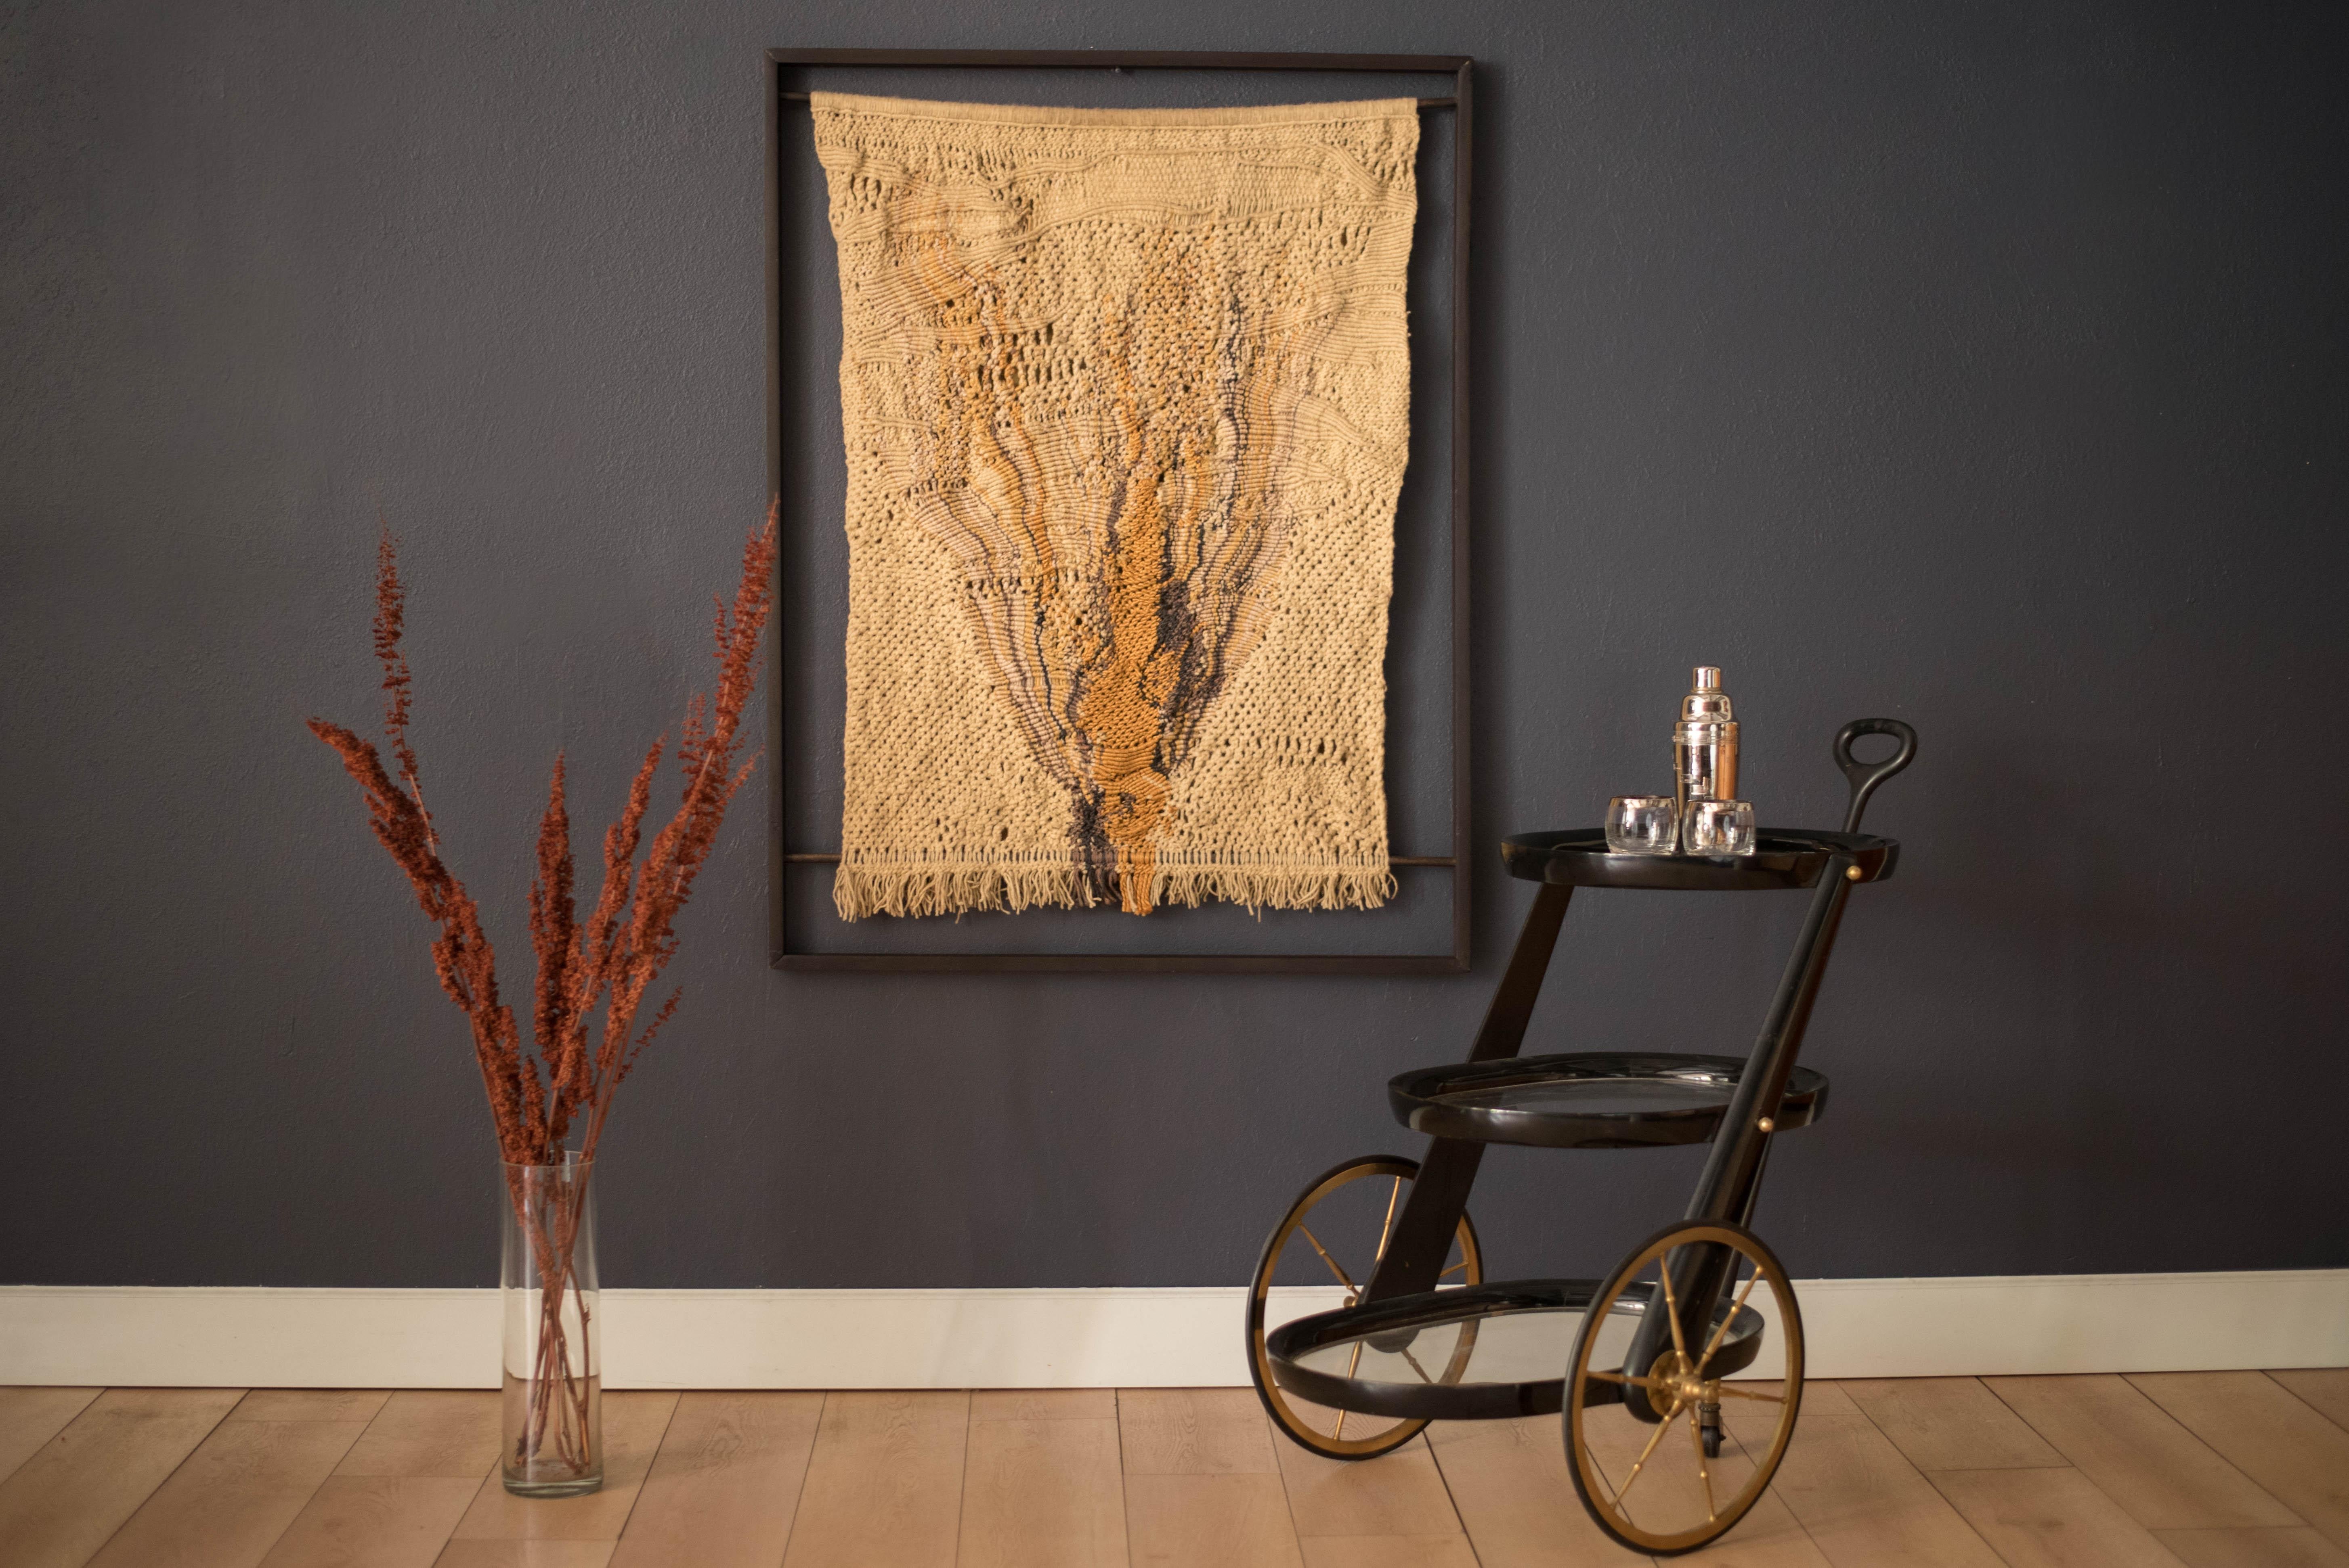 Vintage large scale original abstract fiber art tapestry made by California artist Marion Ferri, circa 1970s. Features an intricate pattern of hand knotted designs accented in a neutral palette of gold, grey, and black tones. Captured in a floating